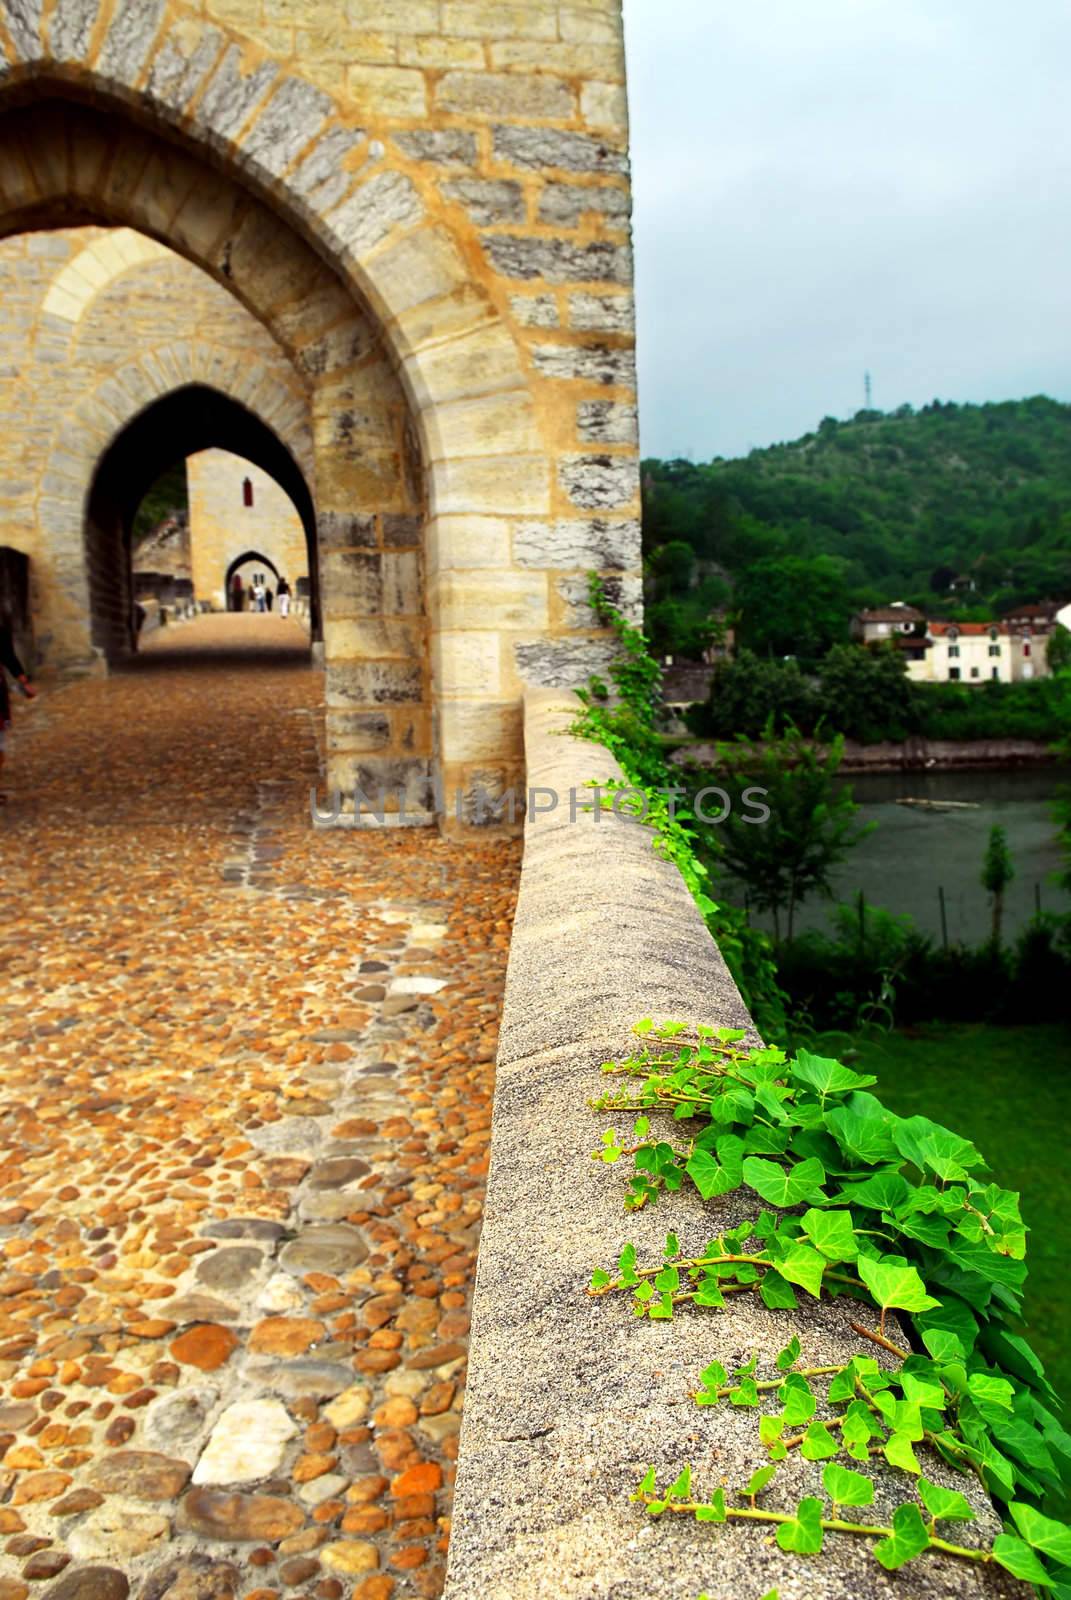 Valentre bridge in Cahors France by elenathewise